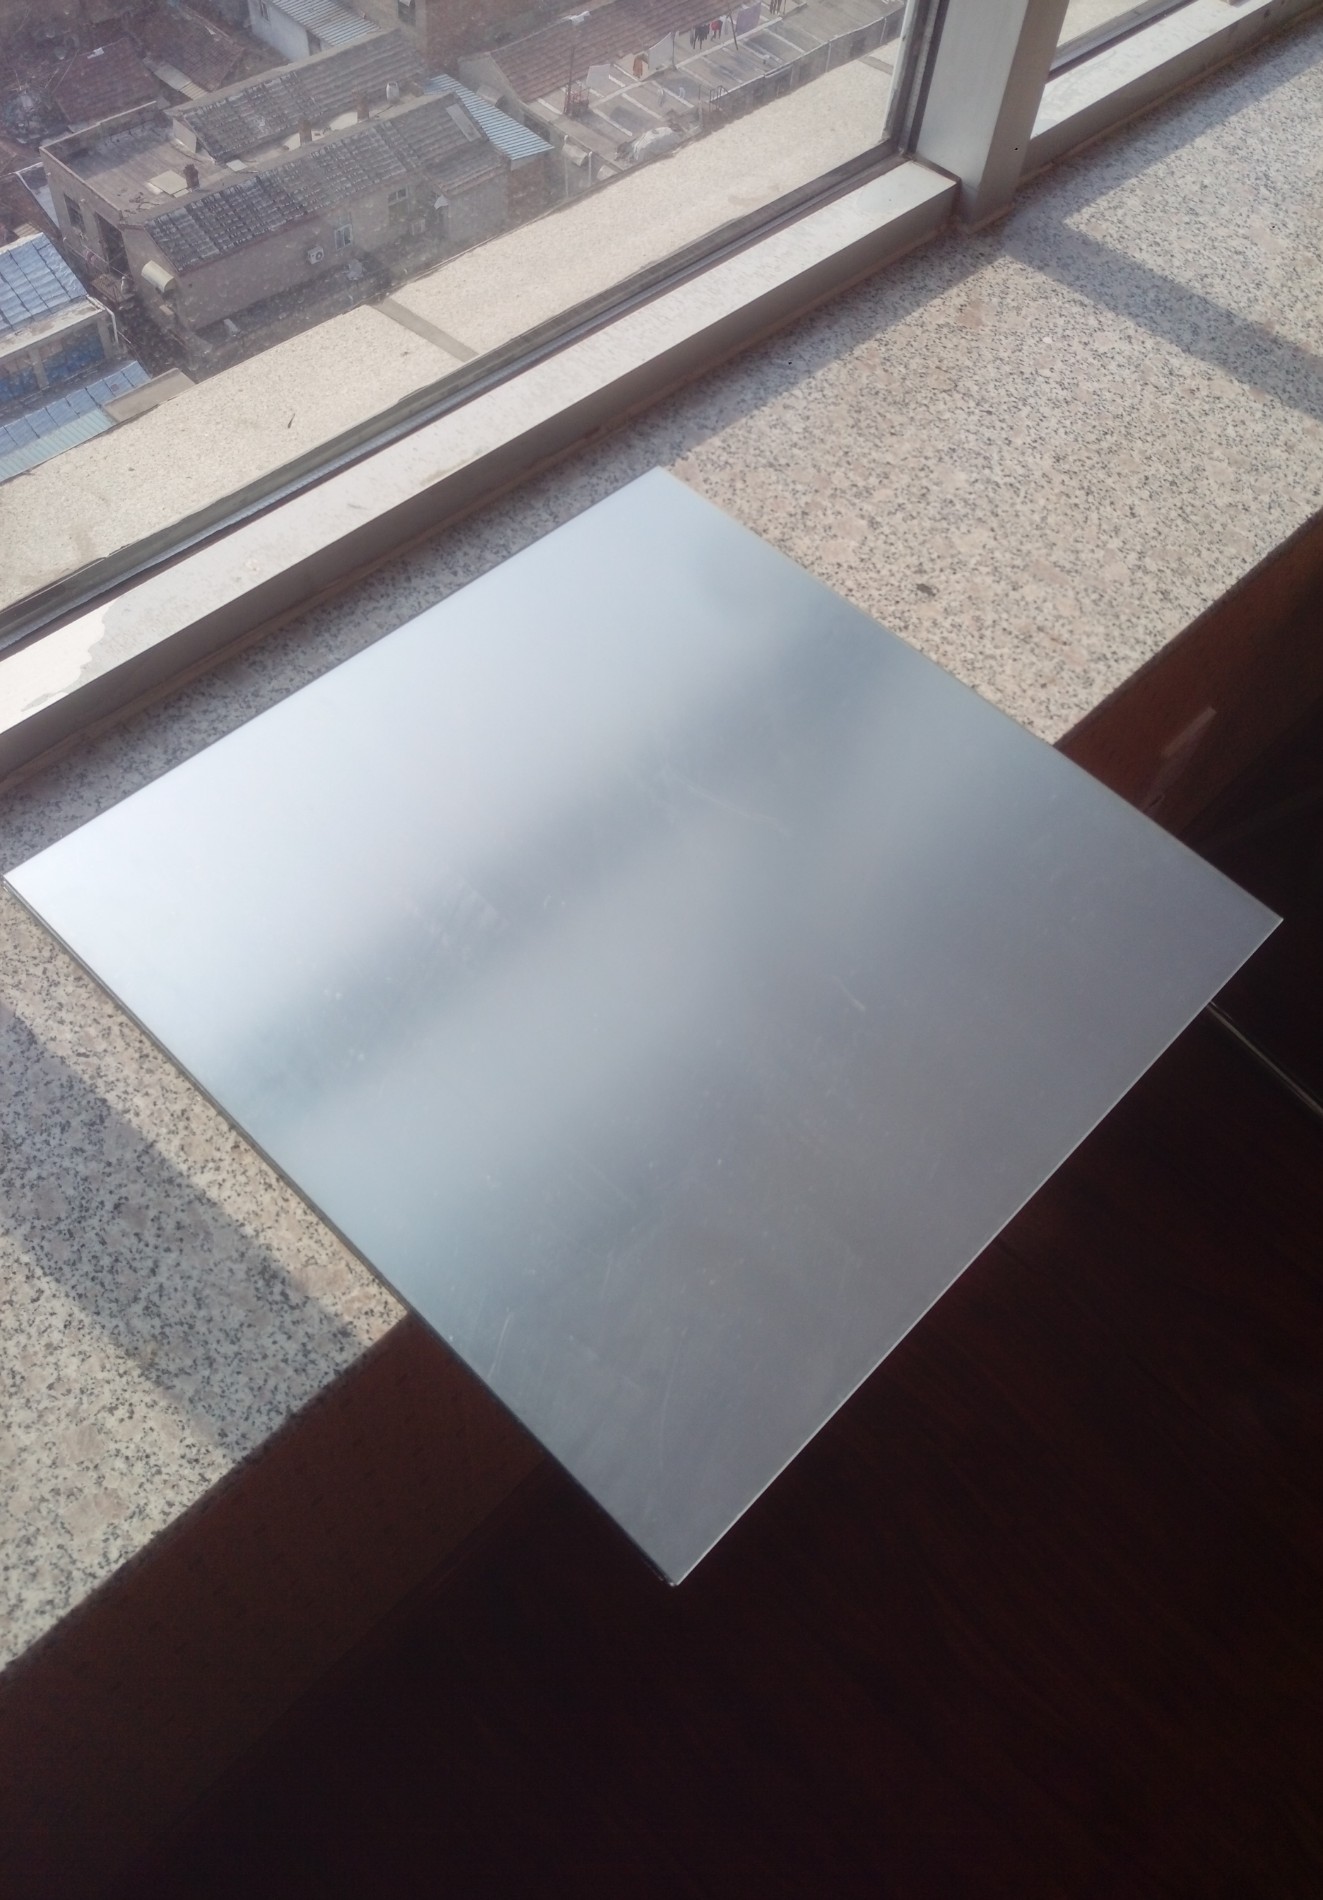 1mm gold and silver mirror plexiglass sheets with self adhesive 1.22mx1.83m Manufacturers, 1mm gold and silver mirror plexiglass sheets with self adhesive 1.22mx1.83m Factory, Supply 1mm gold and silver mirror plexiglass sheets with self adhesive 1.22mx1.83m